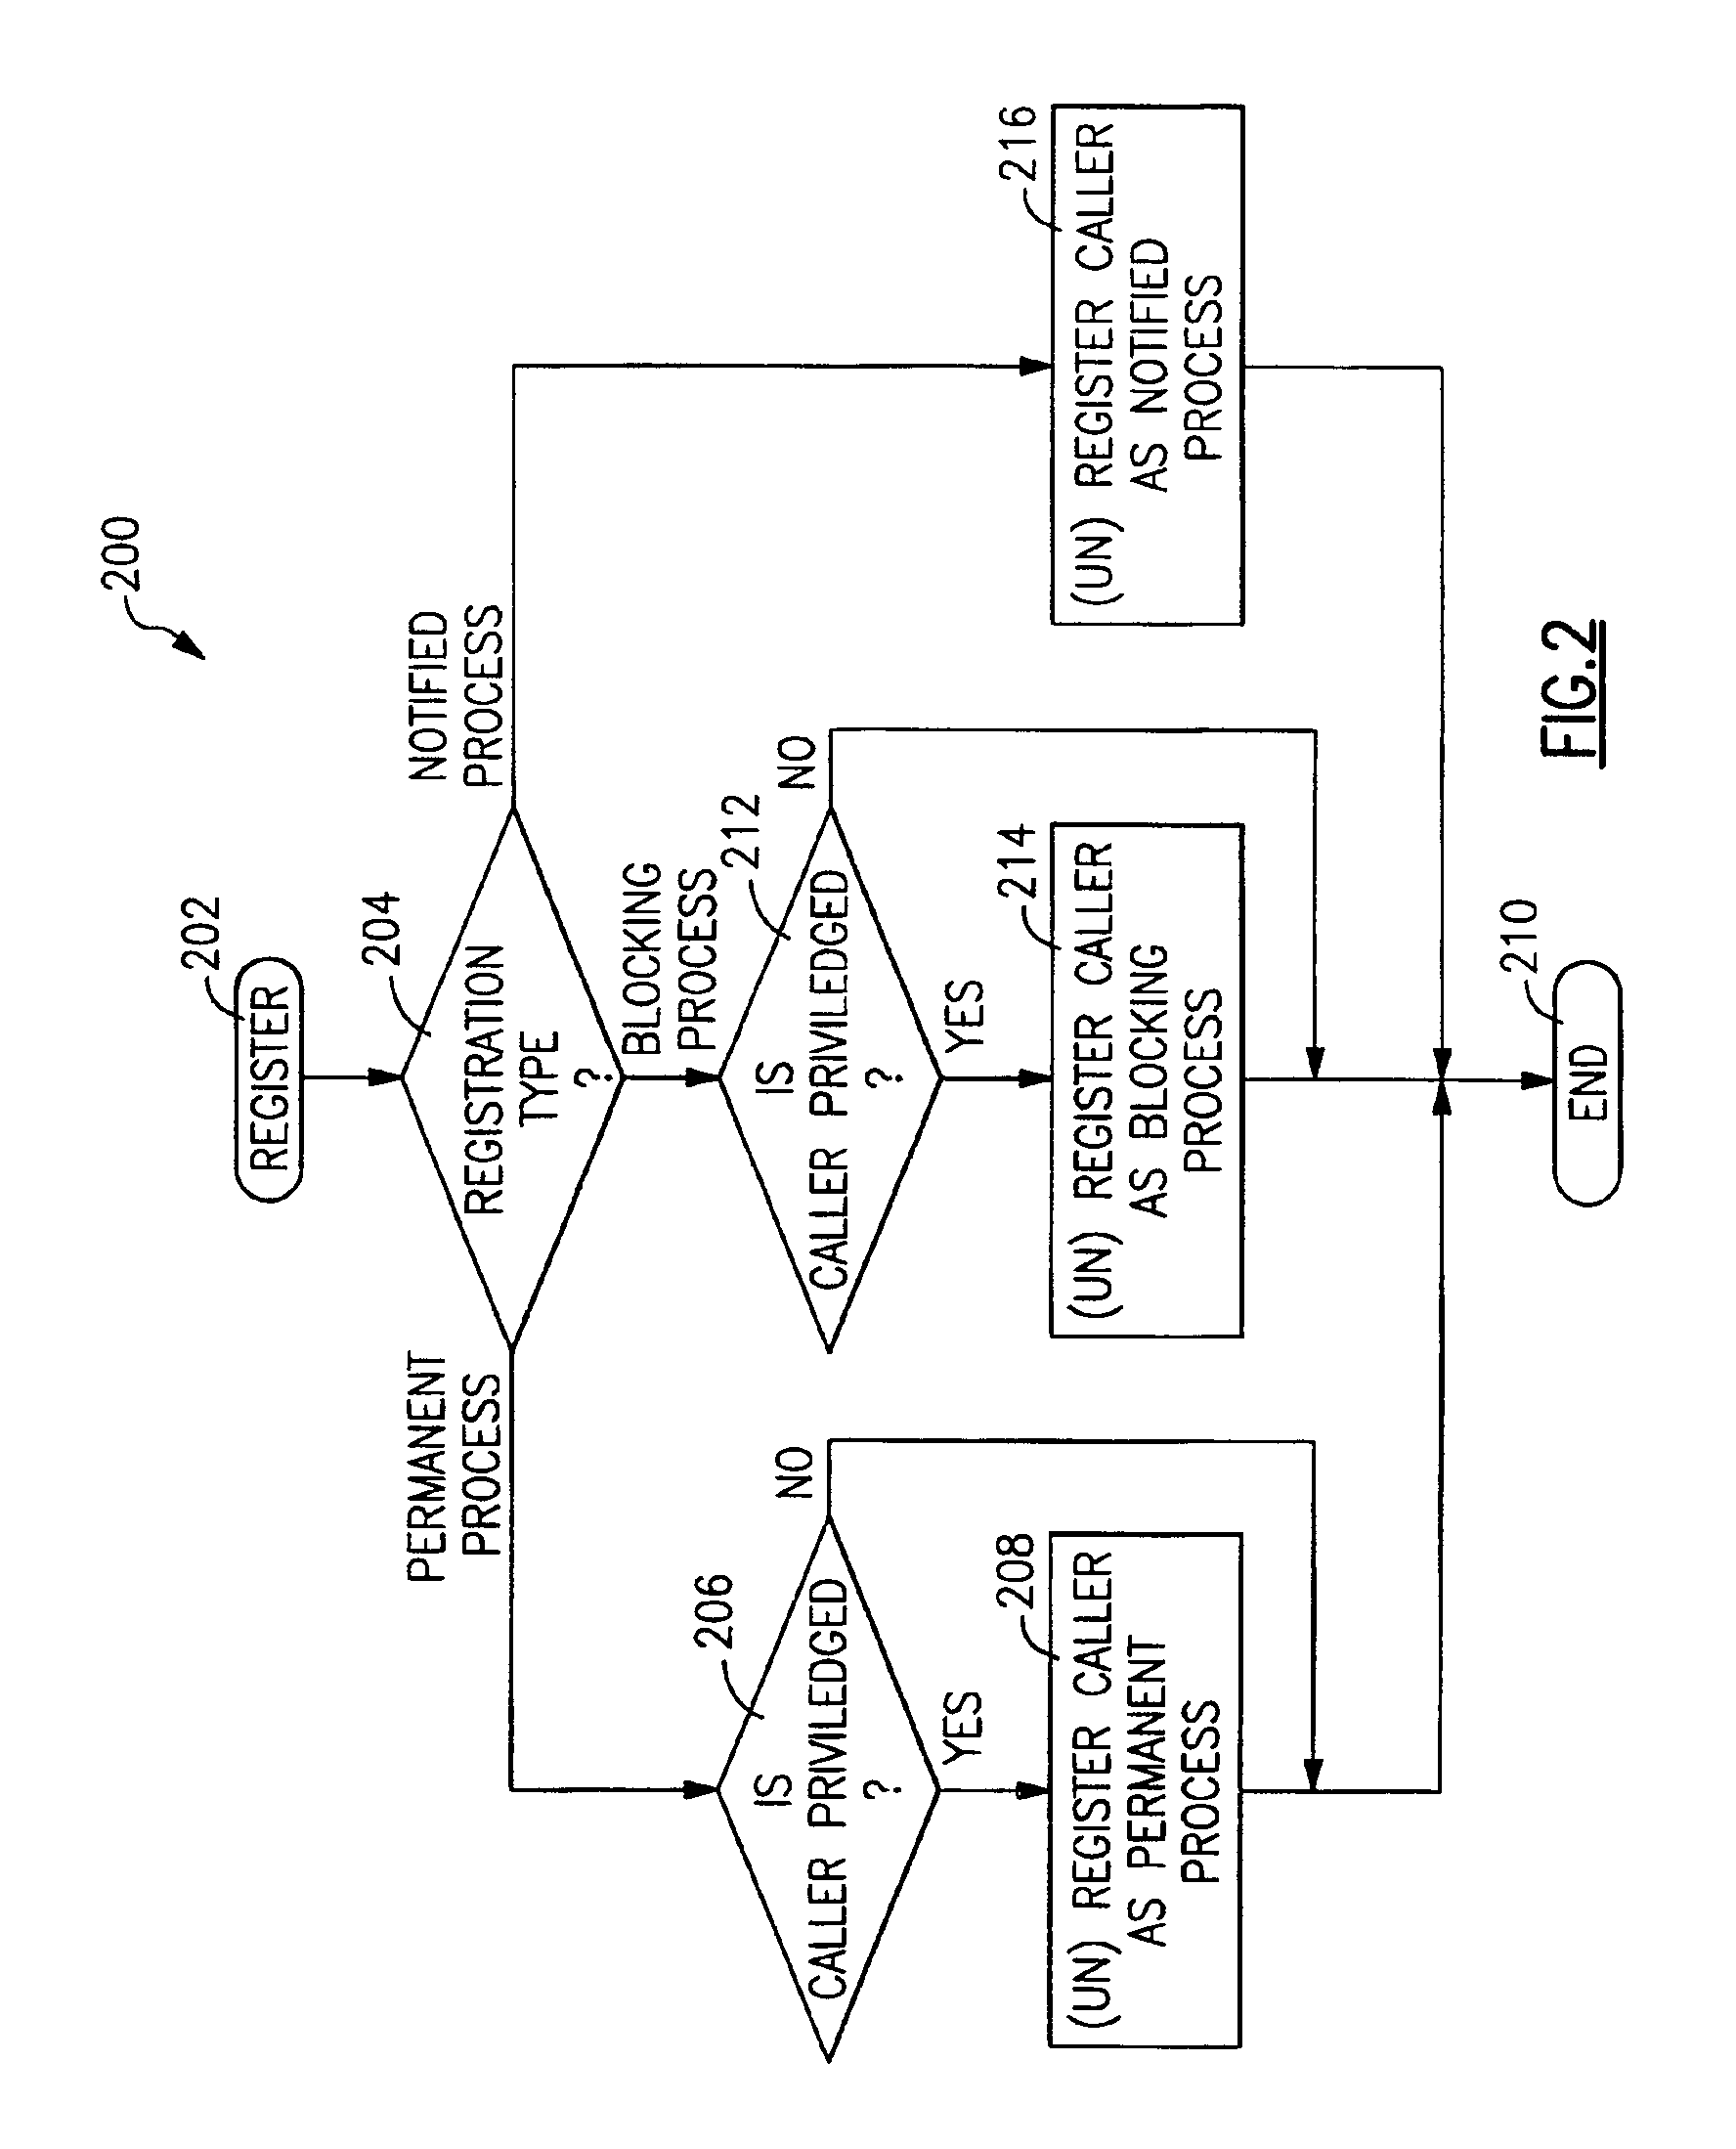 Method and apparatus for controlling the termination of processes in response to a shutdown command